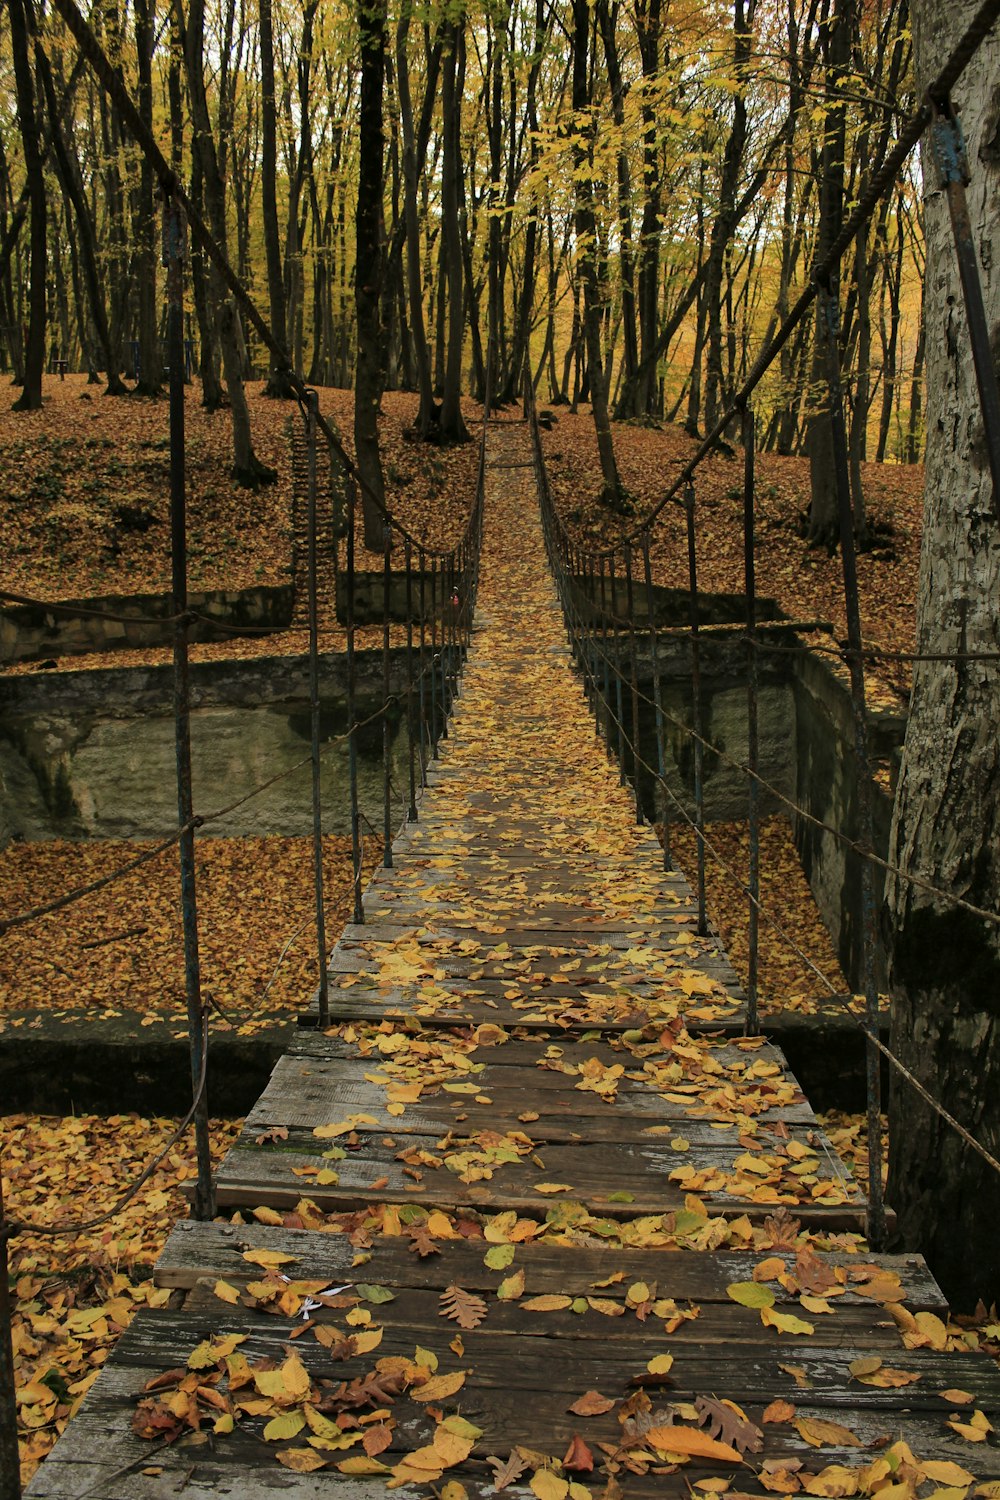 a wooden walkway in a forest with lots of leaves on the ground